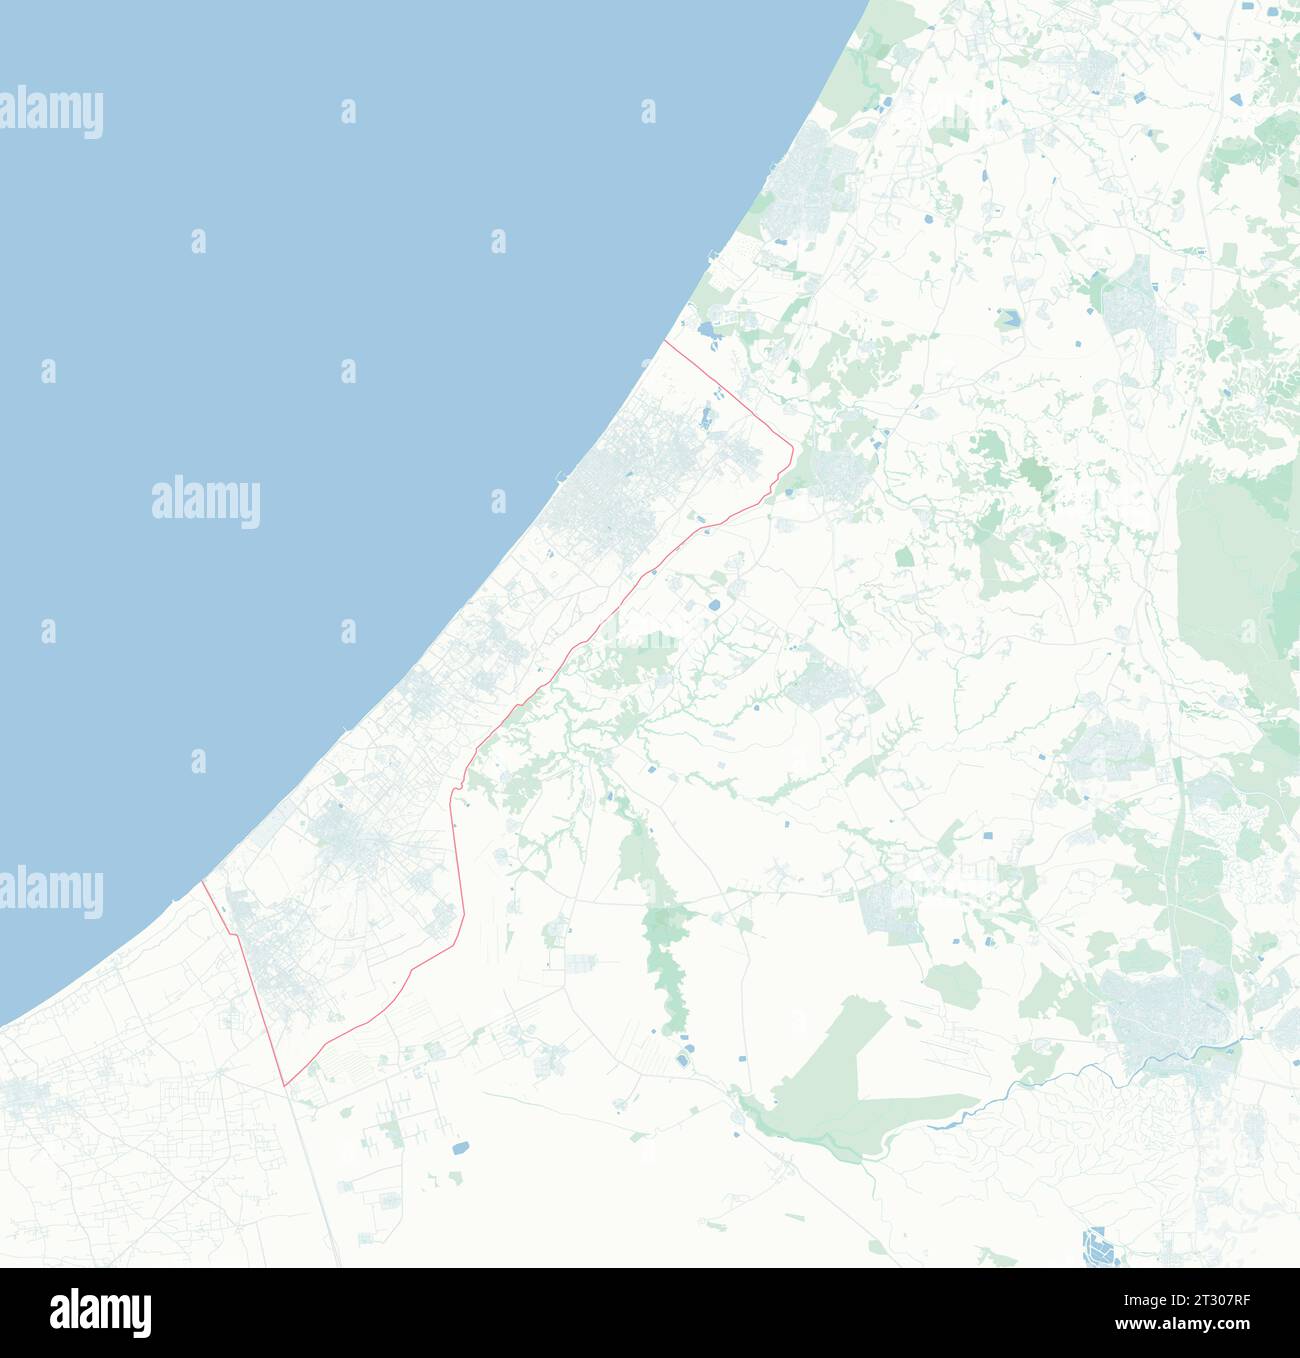 Map of Gaza strip, Israel, map and borders, reliefs and lakes. Streets and buildings. Stock Photo